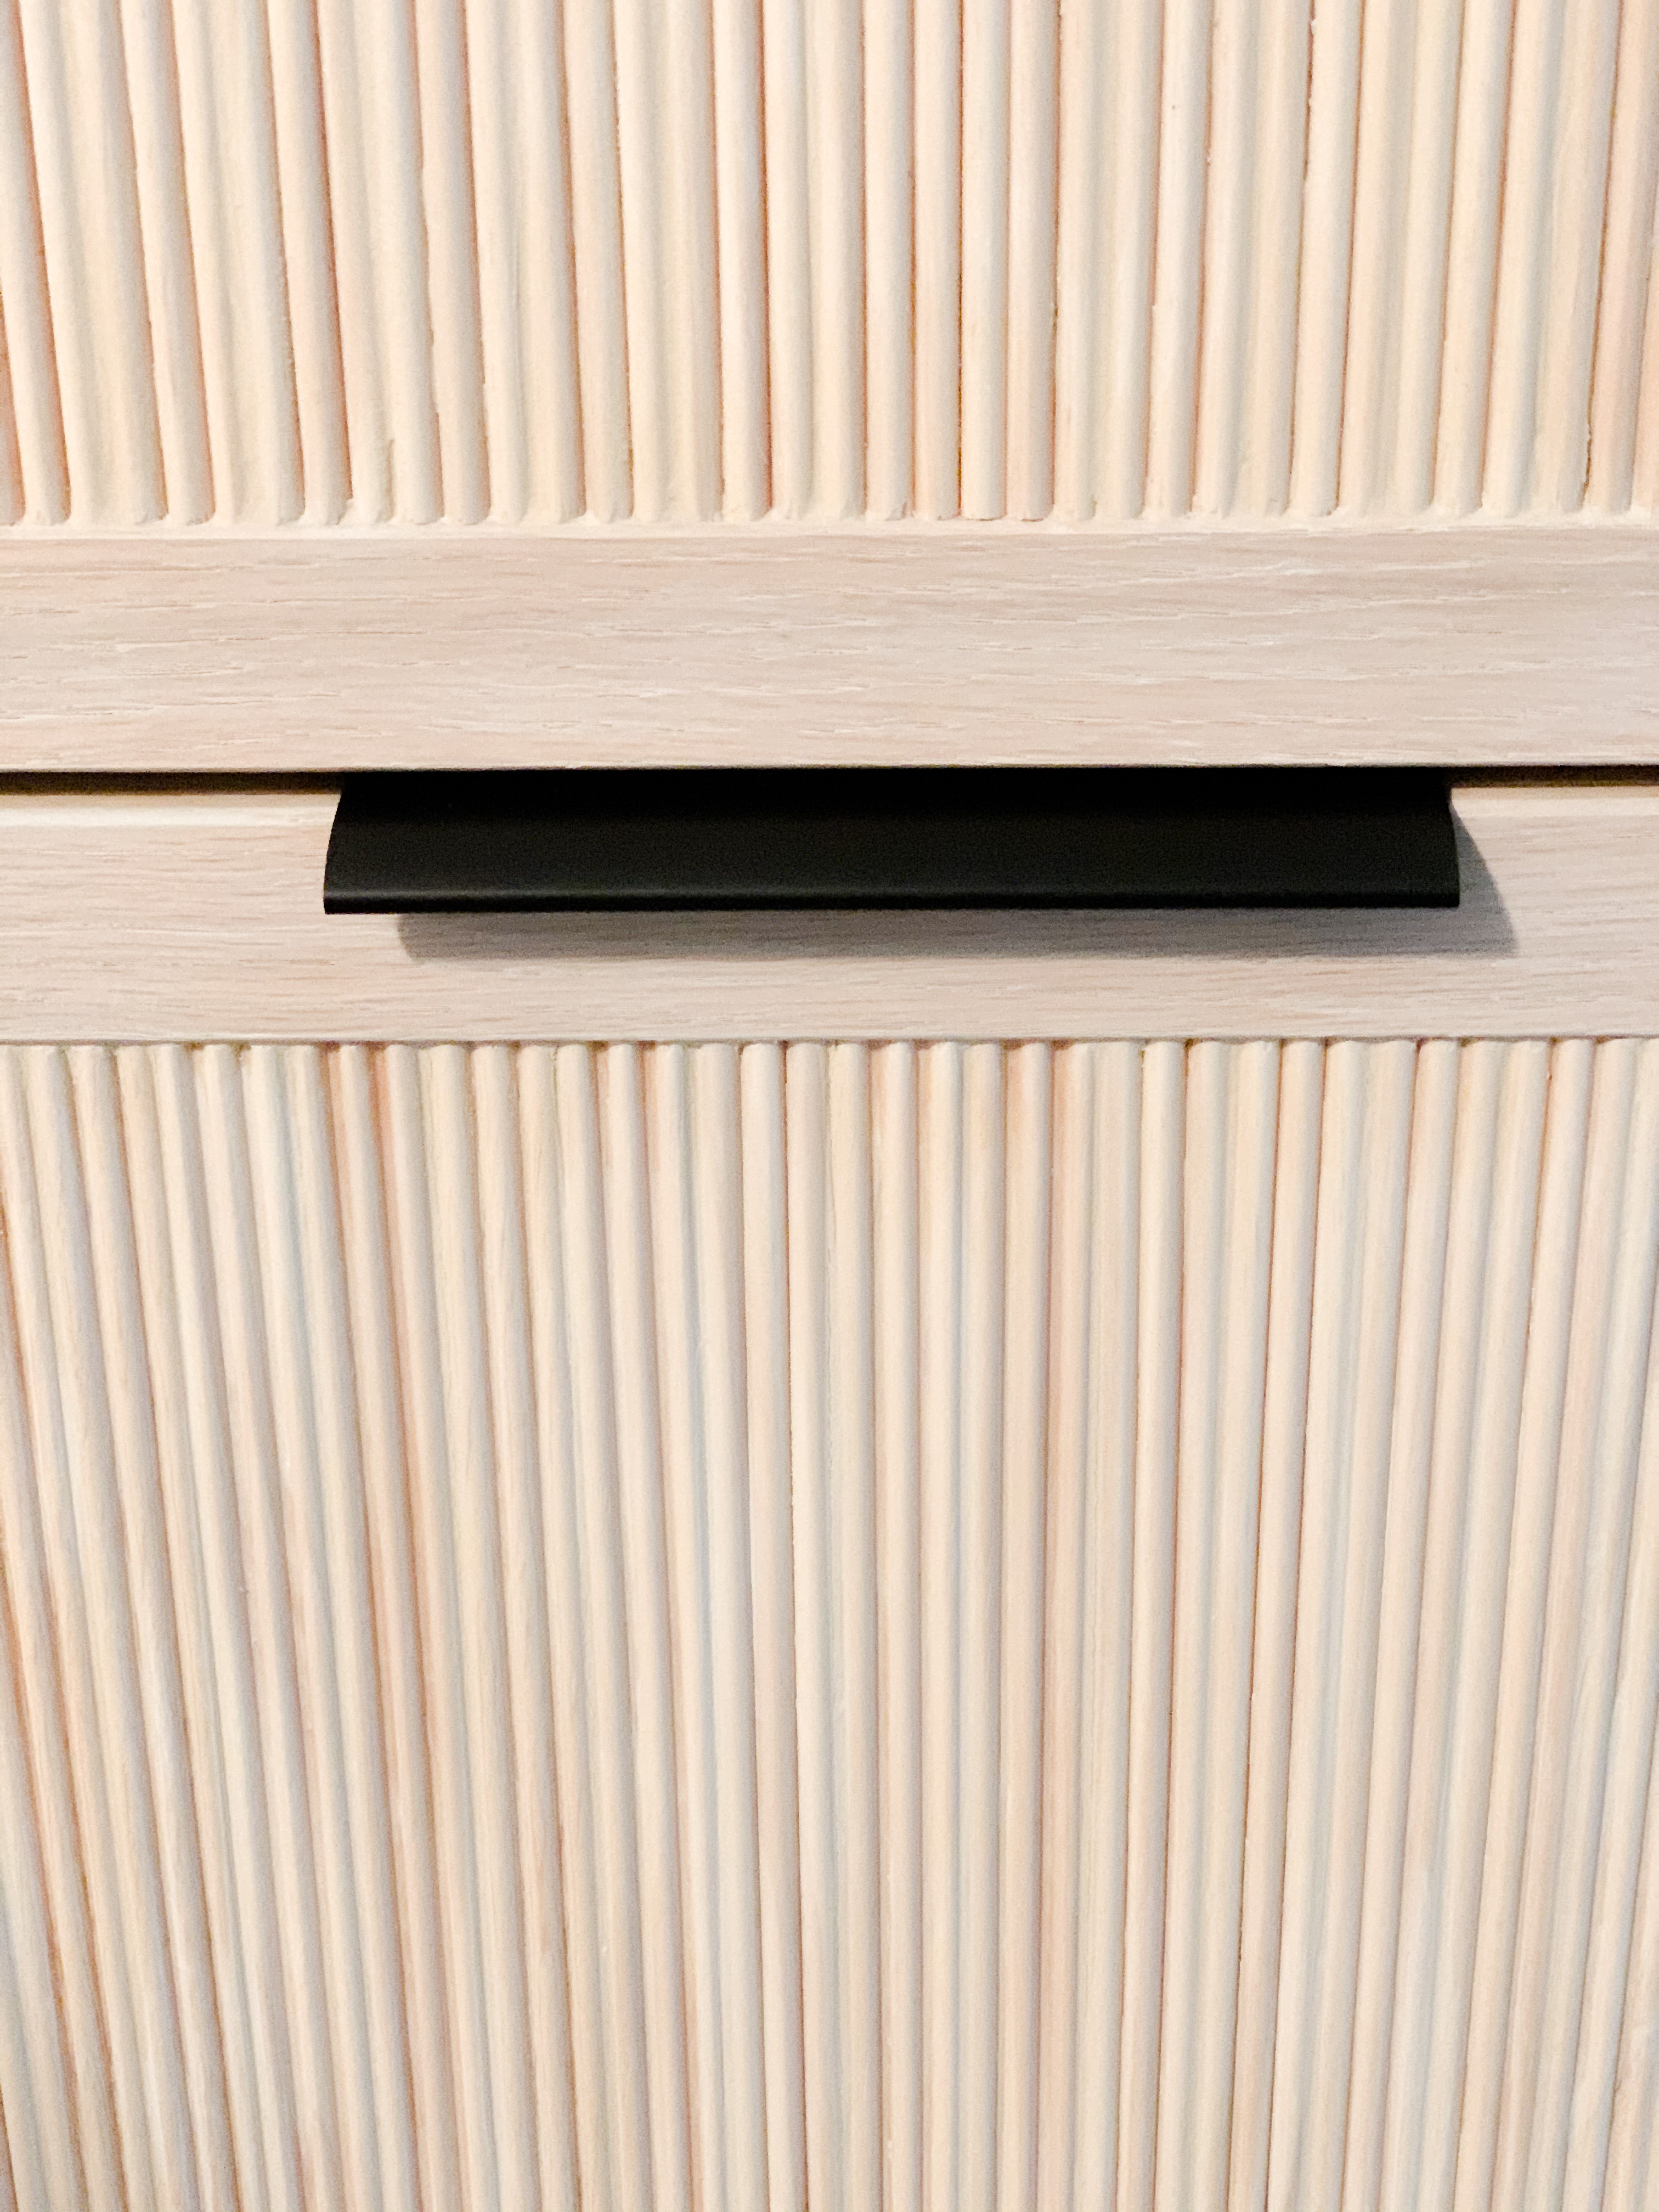 Close up image of the fluted door of the IKEA Stall hack.